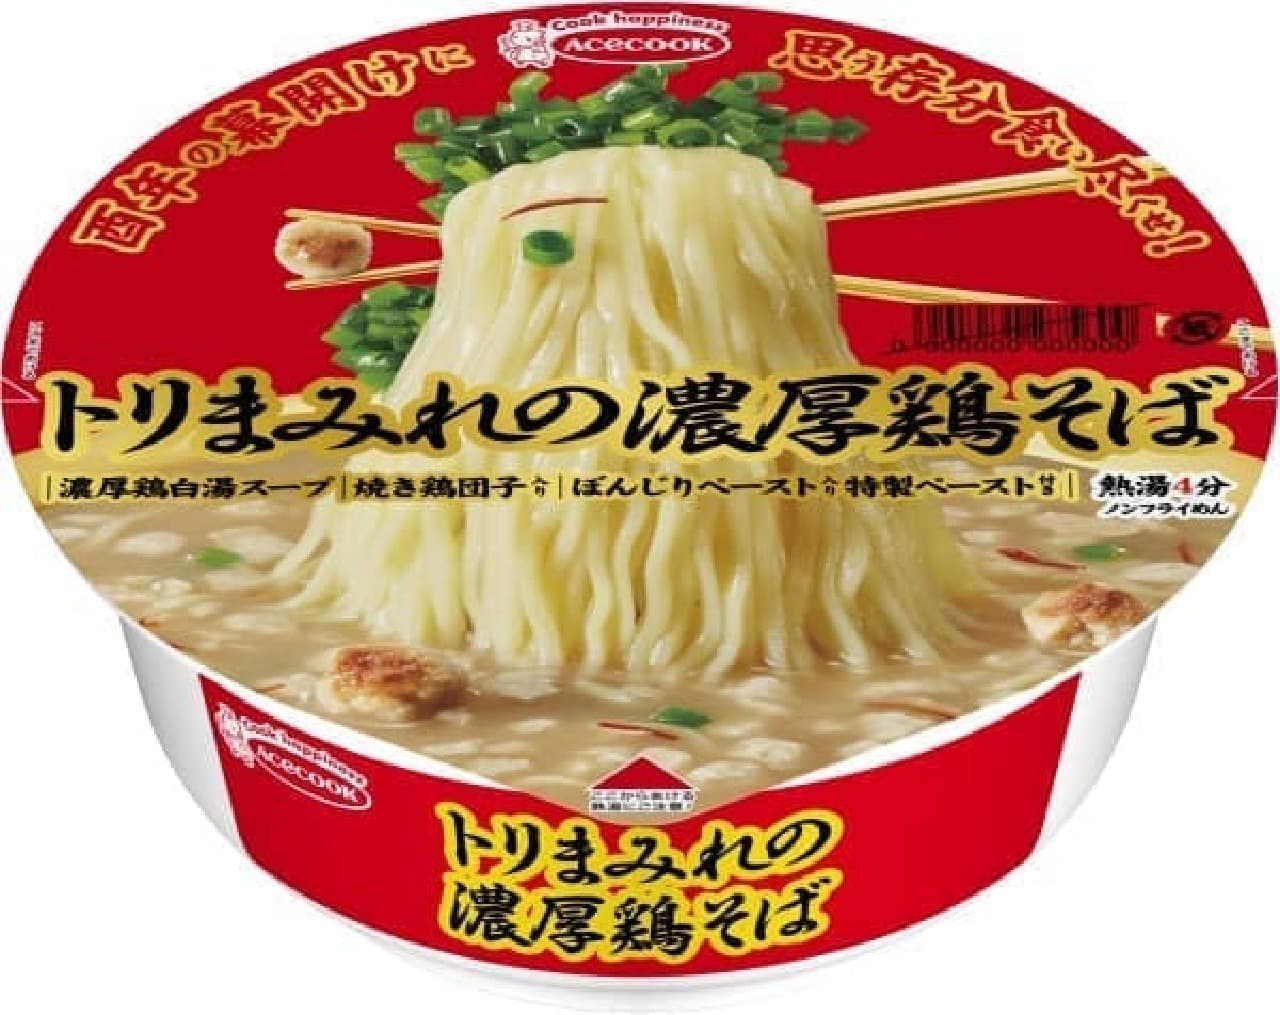 Acecook "Thick chicken soba covered with chicken"